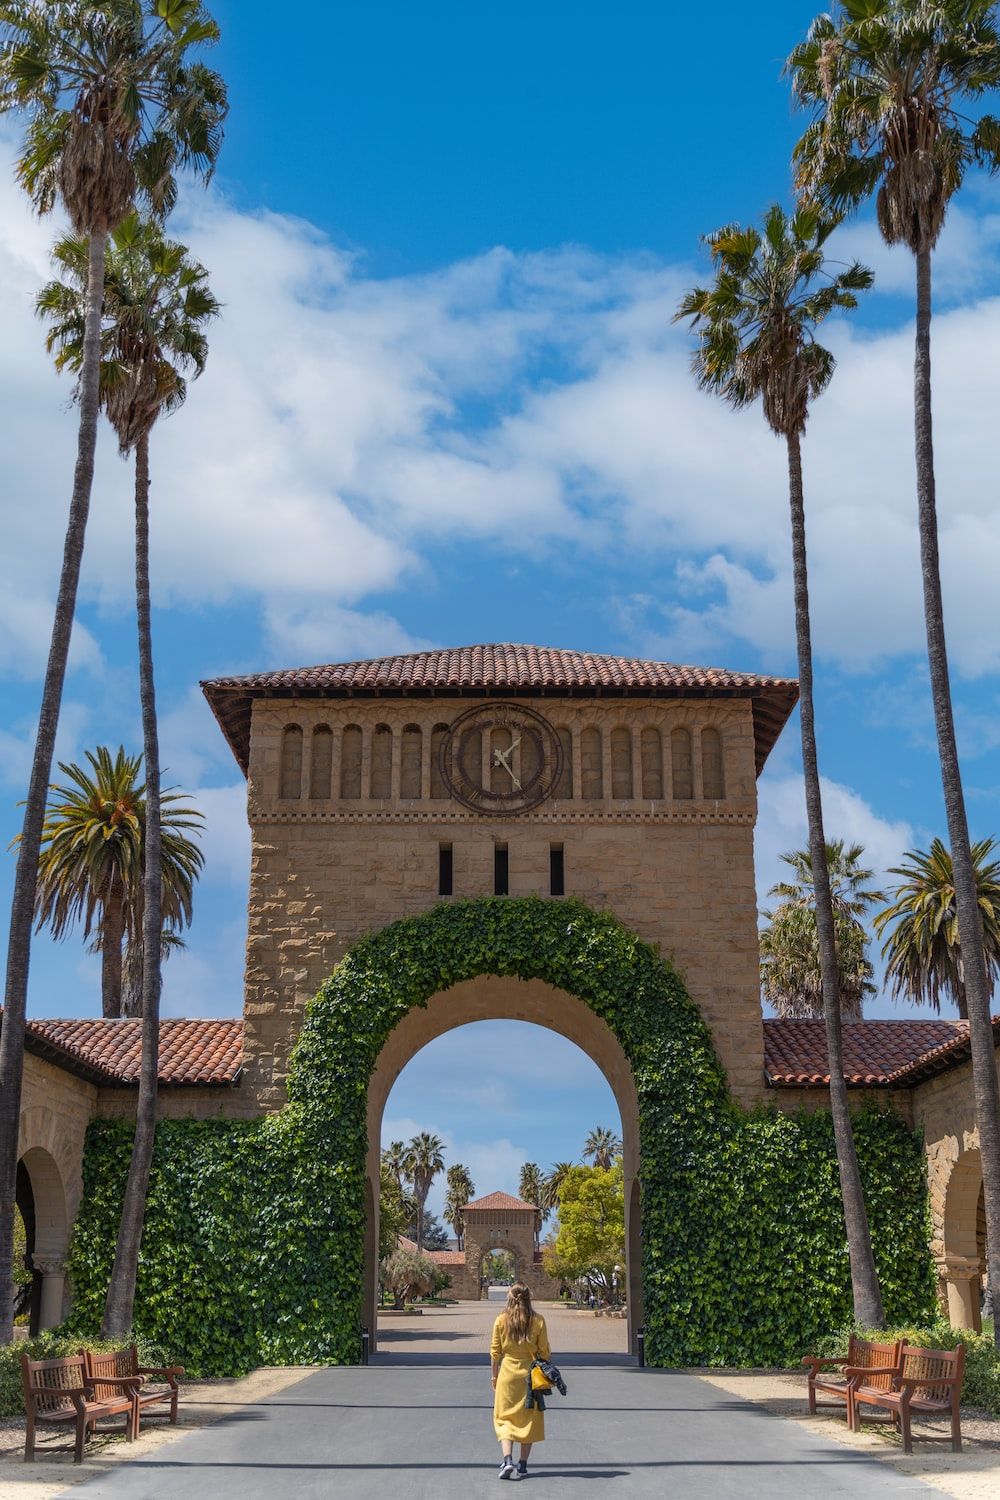 A man riding his bike in front of an archway - Stanford